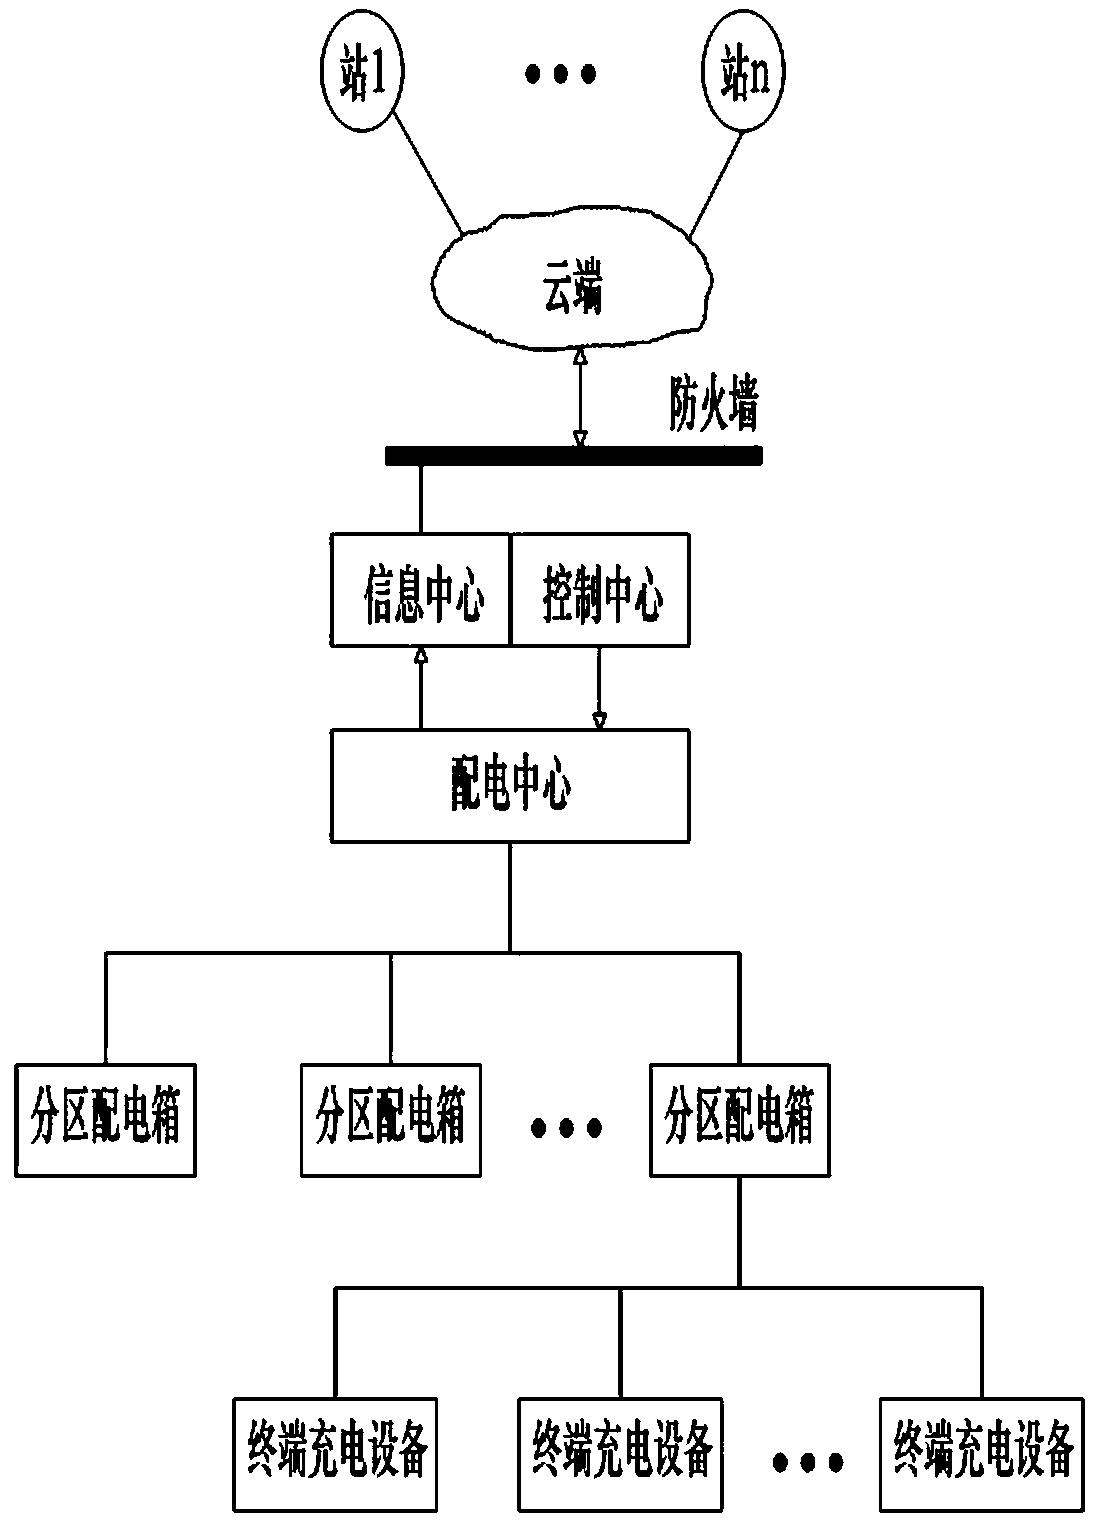 Charging operation service system based on terminal intelligent monitoring function and management method